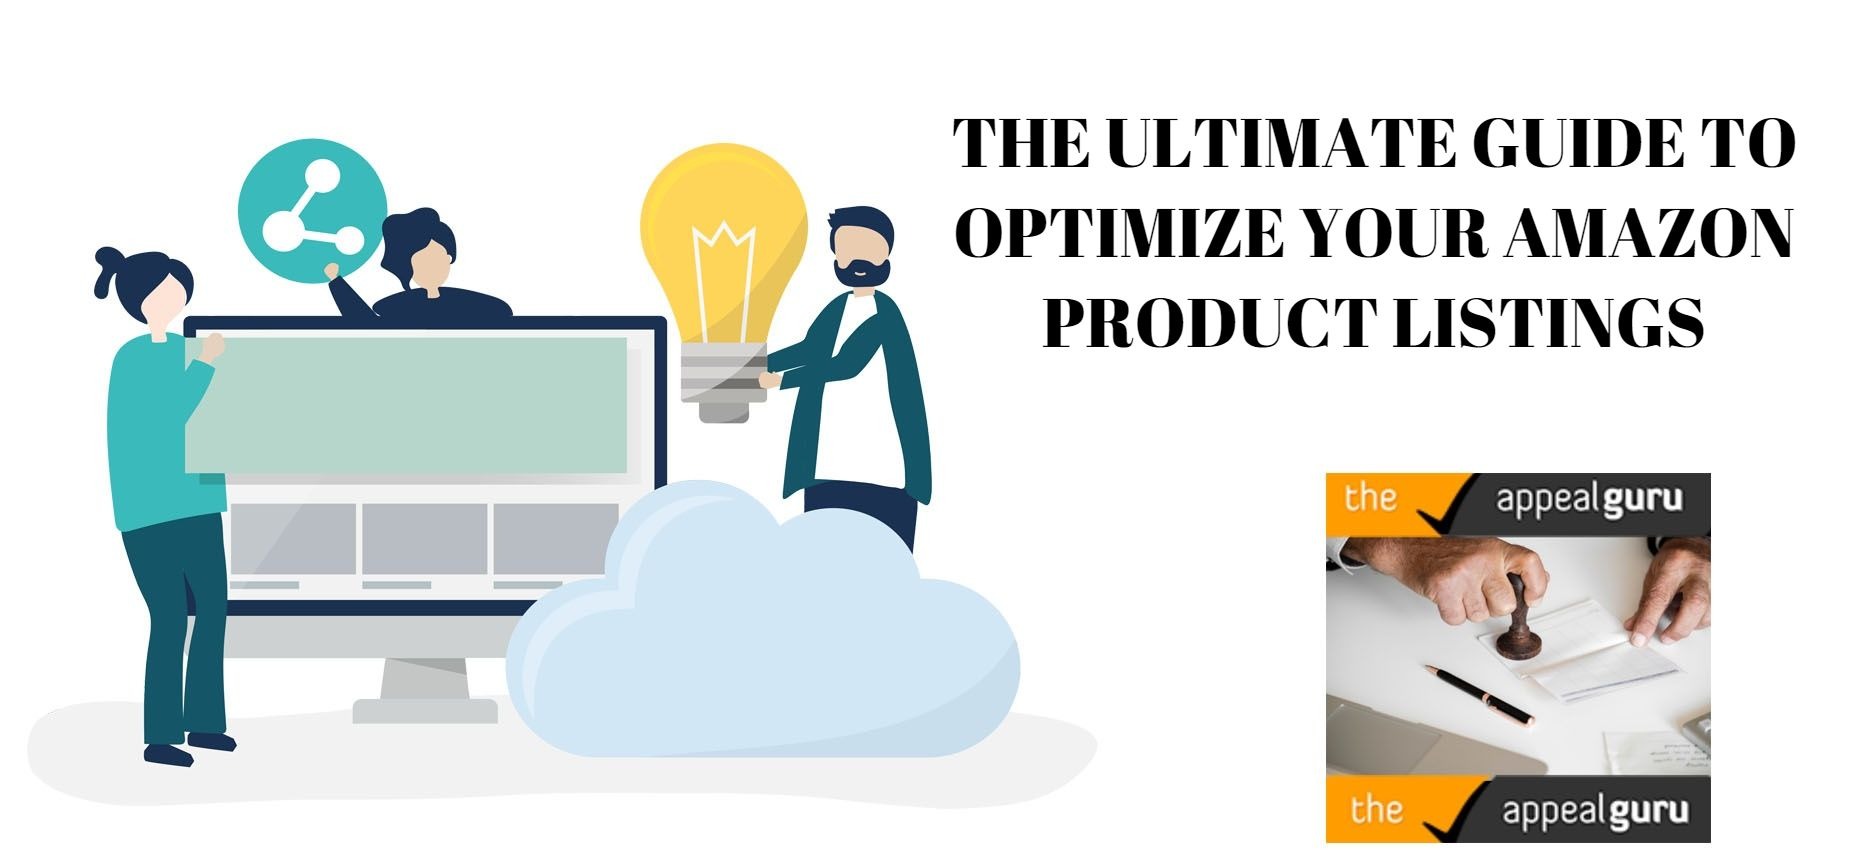 THE ULTIMATE GUIDE TO OPTIMIZE YOUR AMAZON PRODUCT LISTINGS